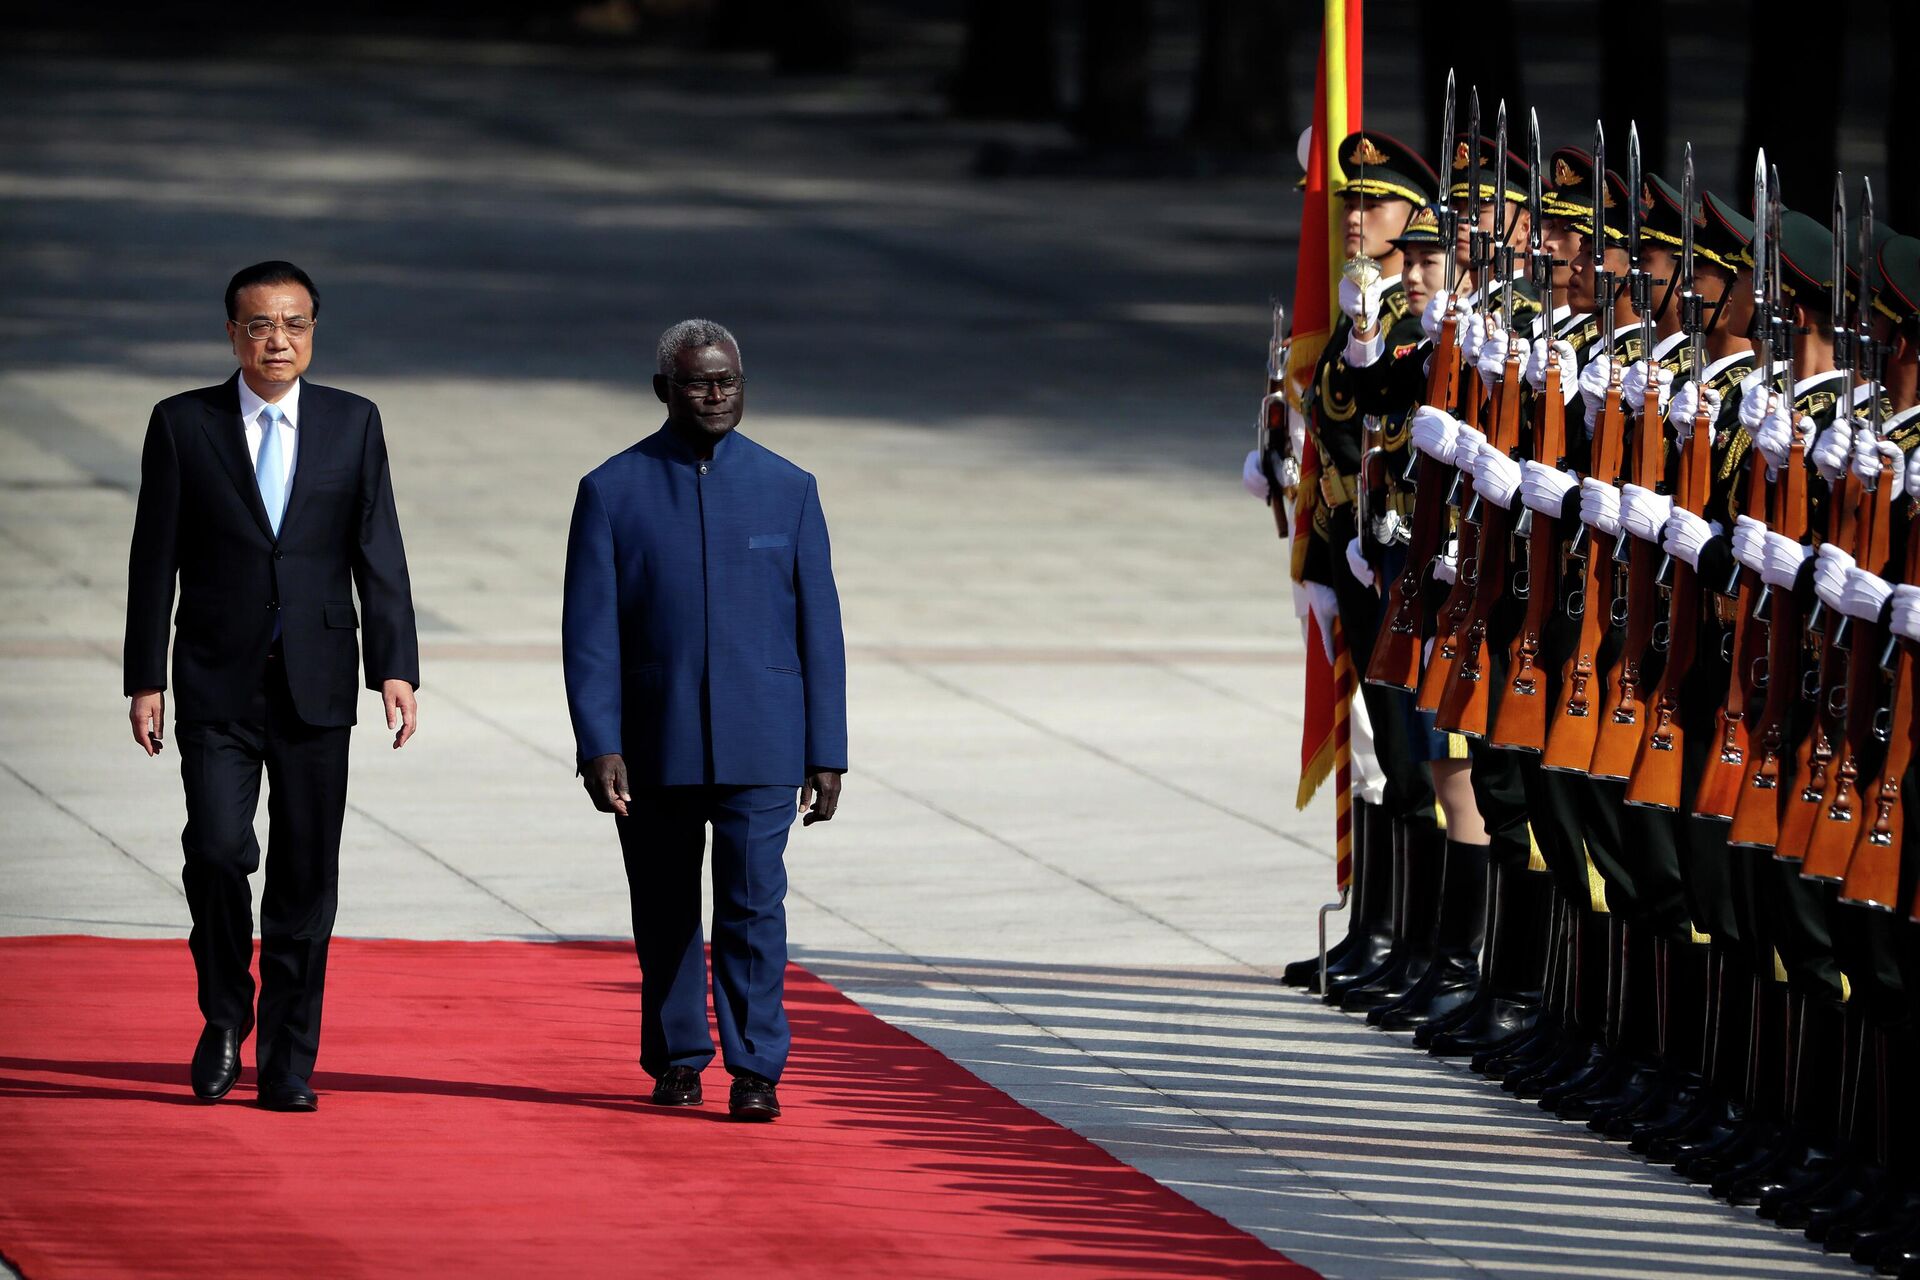 Chinese Premier Li Keqiang, left, and Solomon Islands Prime Minister Manasseh Sogavare review an honor guard during a welcome ceremony at the Great Hall of the People in Beijing, Wednesday, Oct. 9, 2019. - Sputnik International, 1920, 13.09.2022